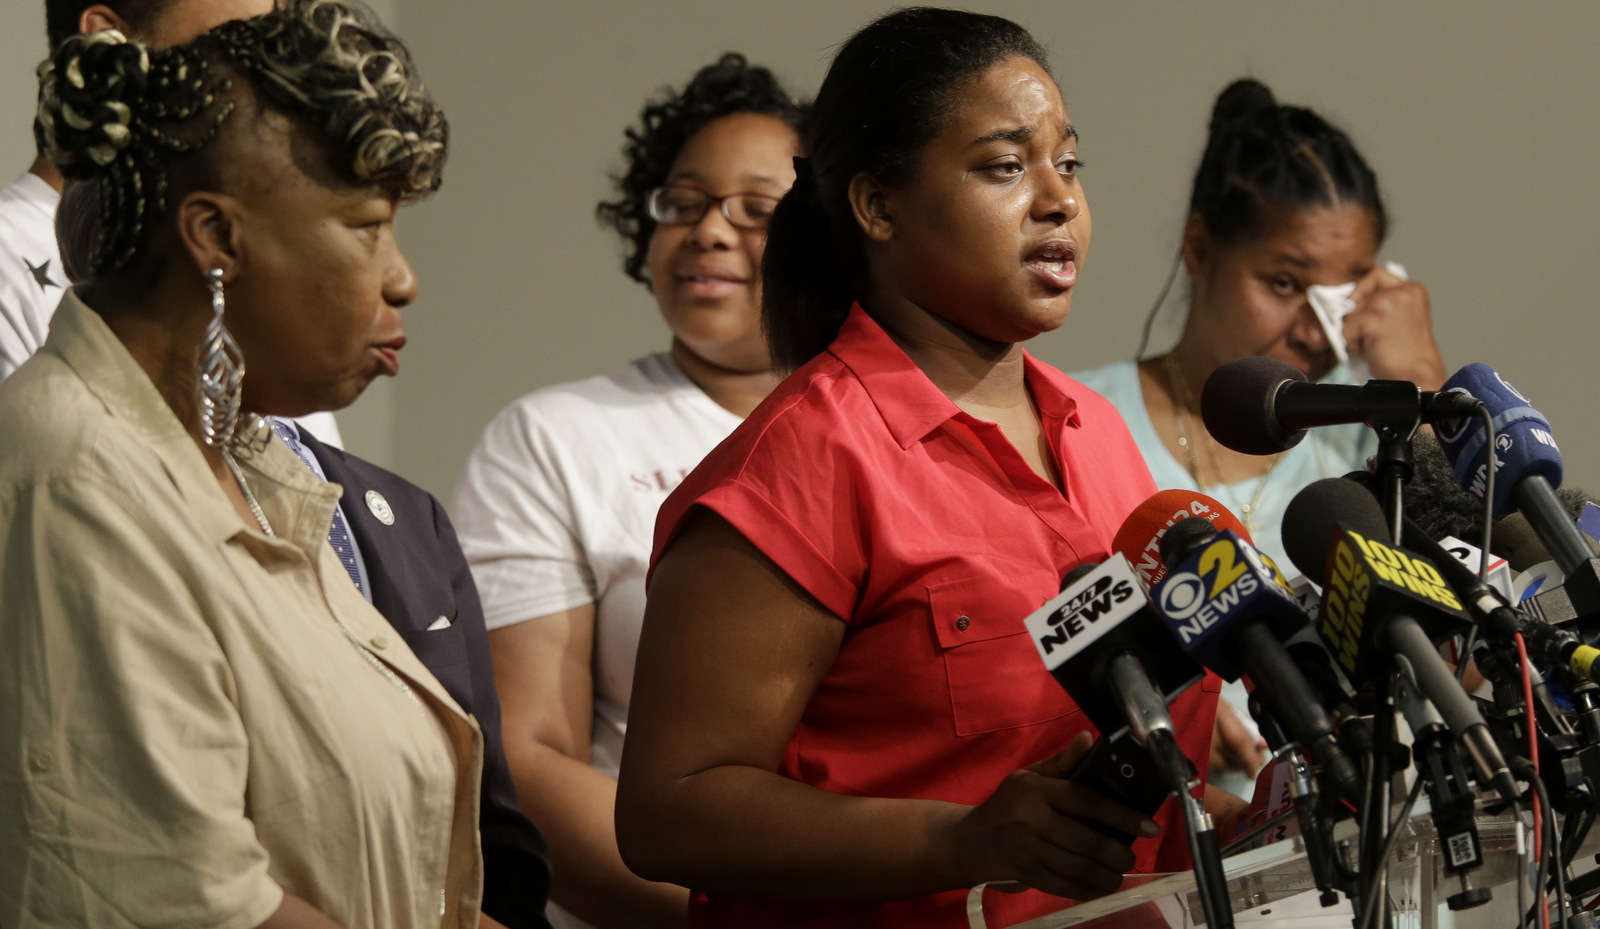 Eric Garner is surrounded by family as she speaks during a news conference, July 14, 2015, in New York, days before the anniversary of her father's death at the hands of the NYPD. (AP/Mary Altaffer)